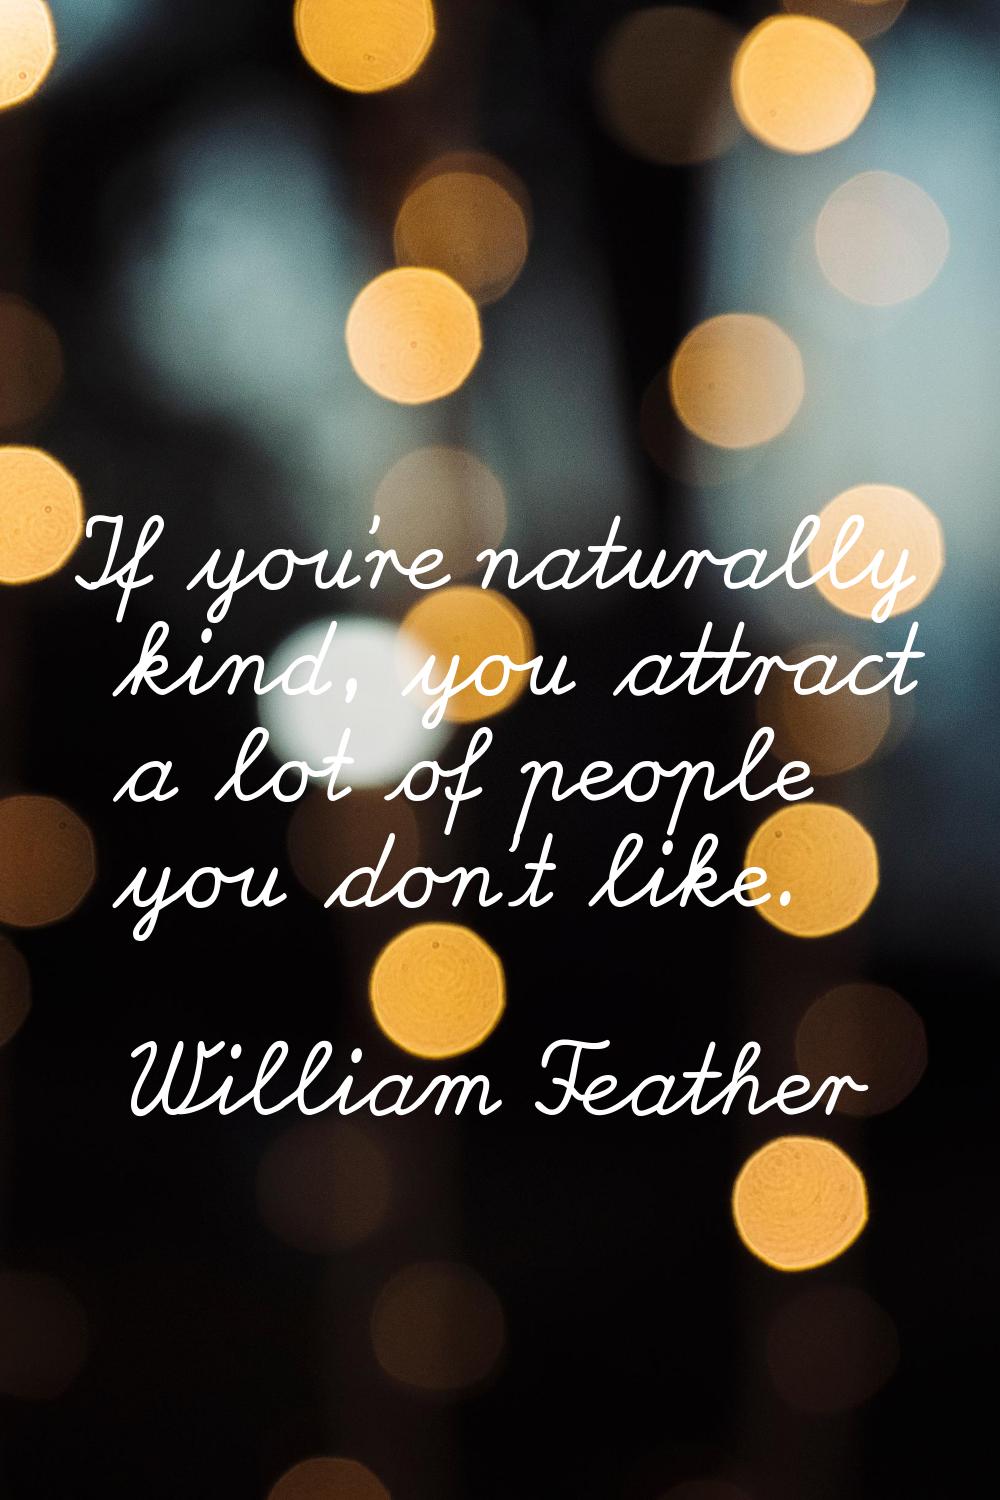 If you're naturally kind, you attract a lot of people you don't like.